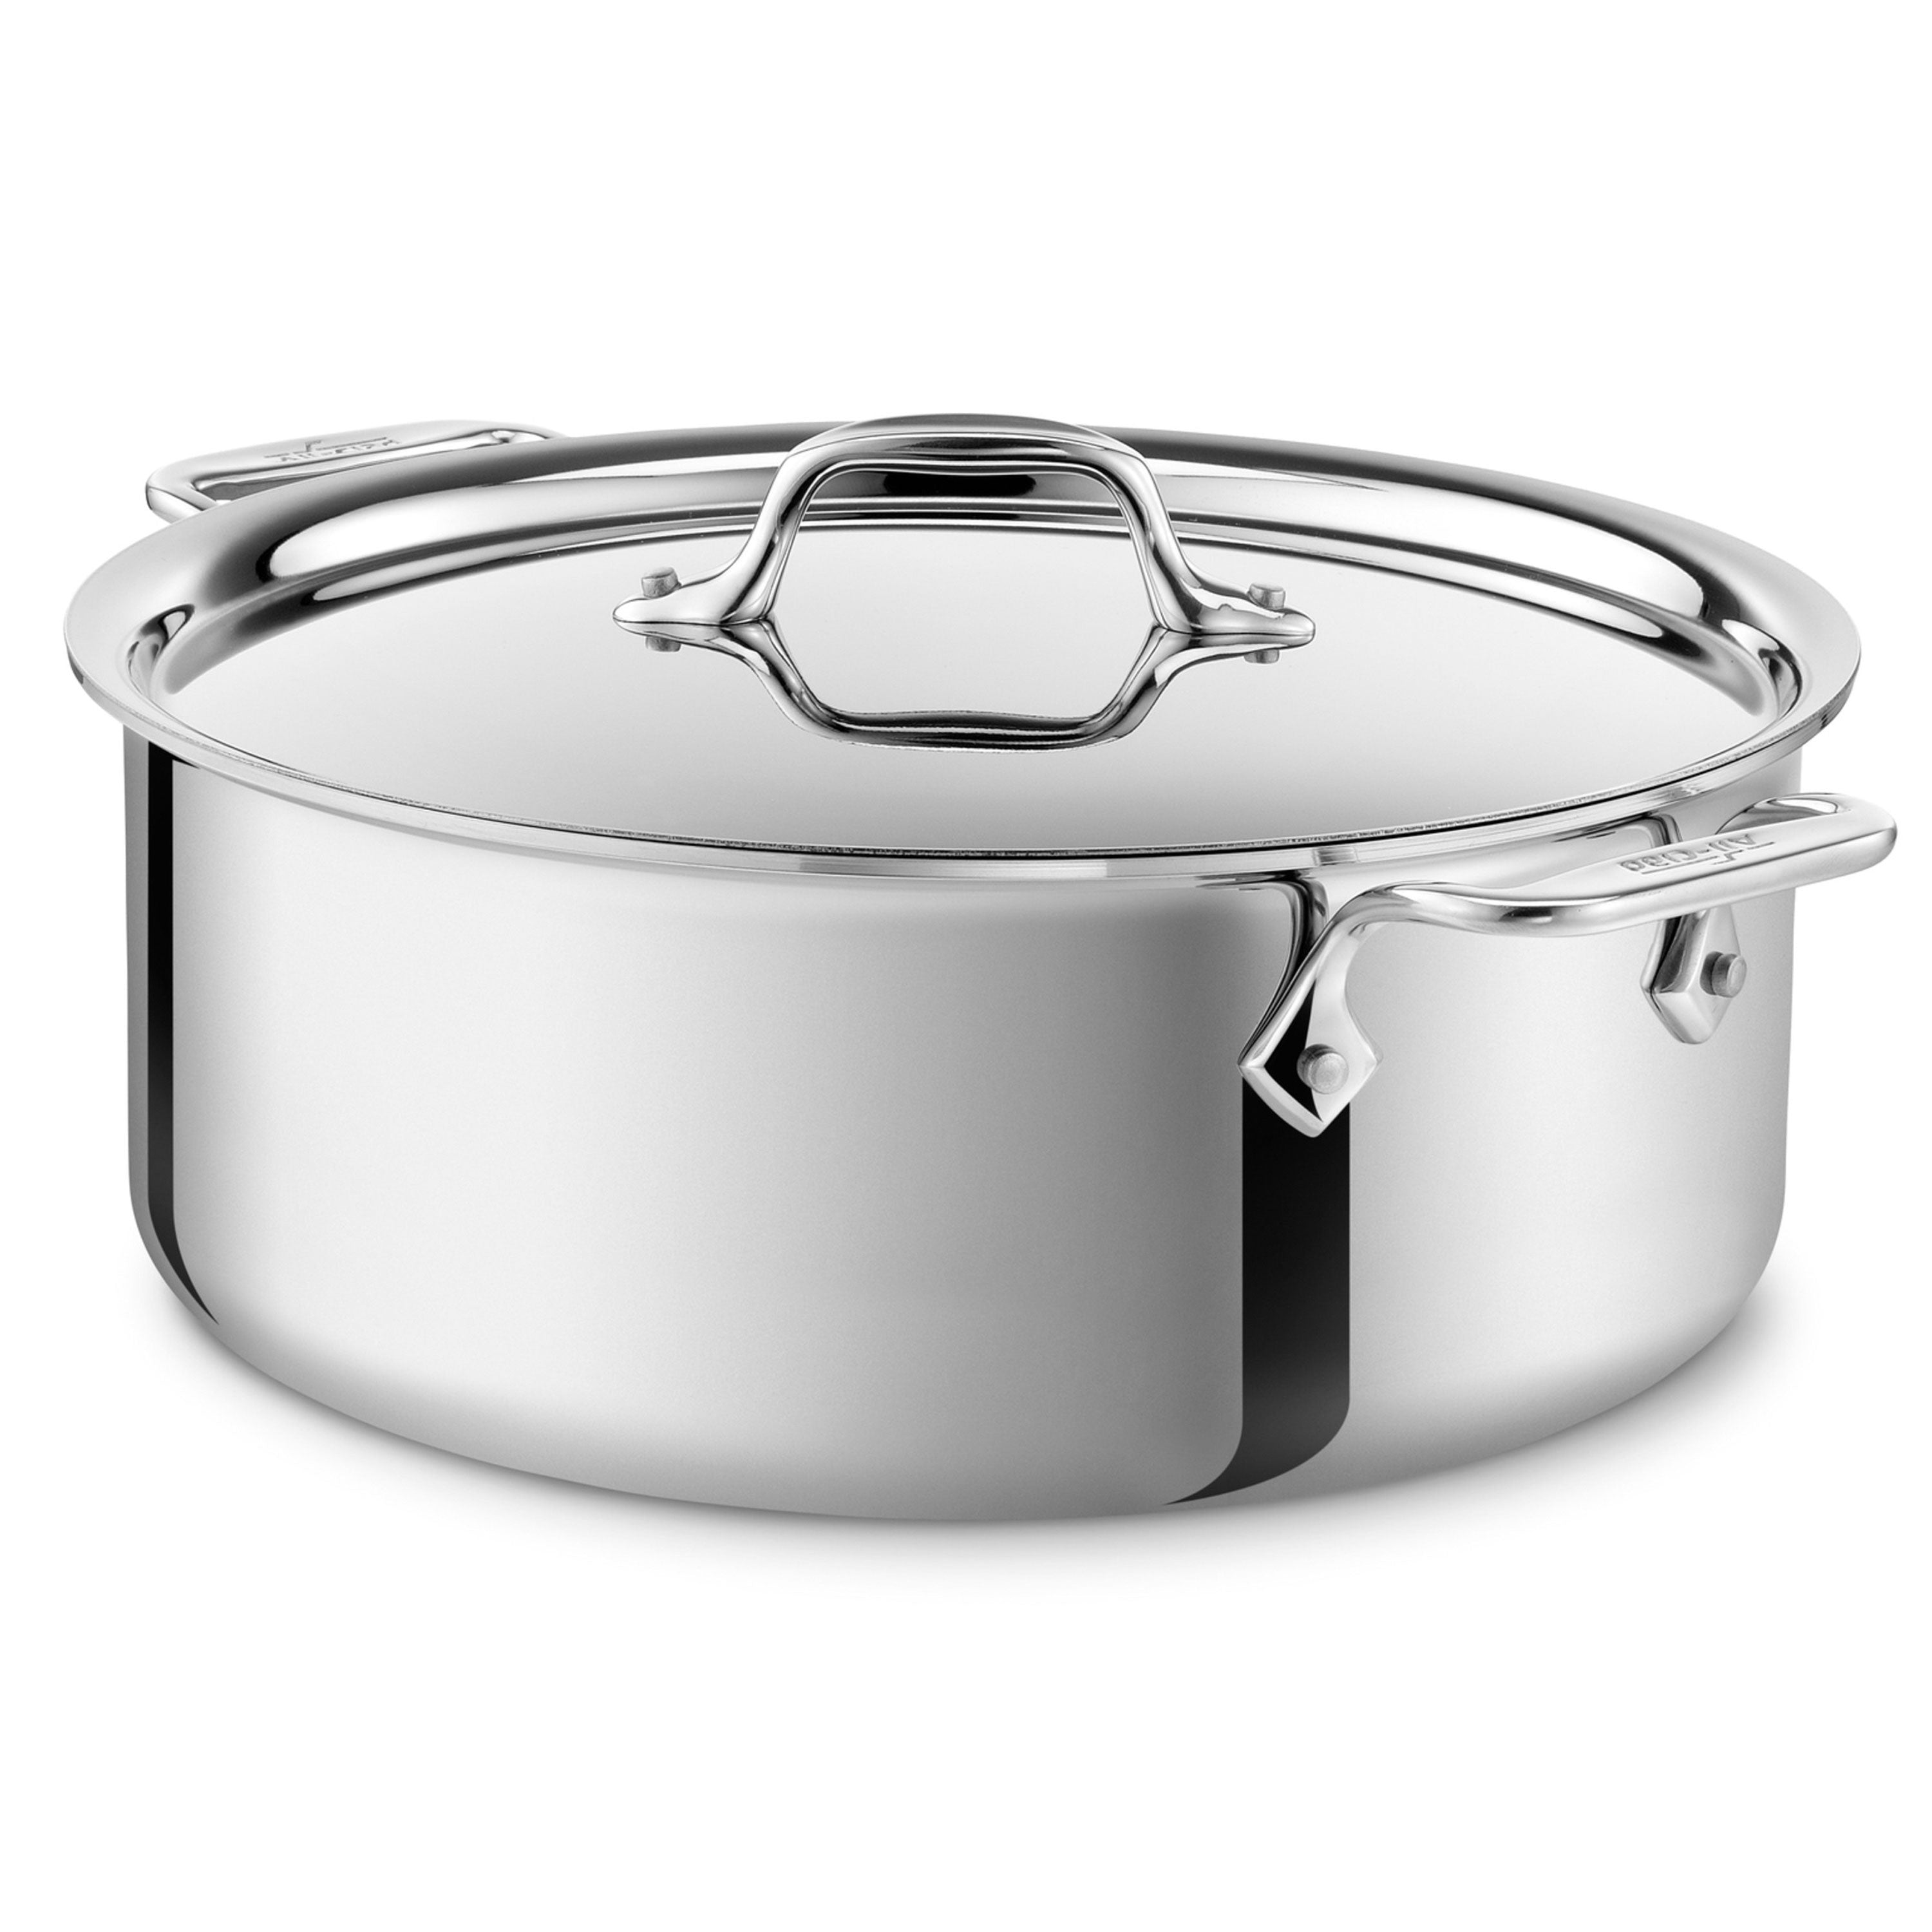 All-Clad d3 Stainless Stock Pot - 6-quart – Cutlery and More